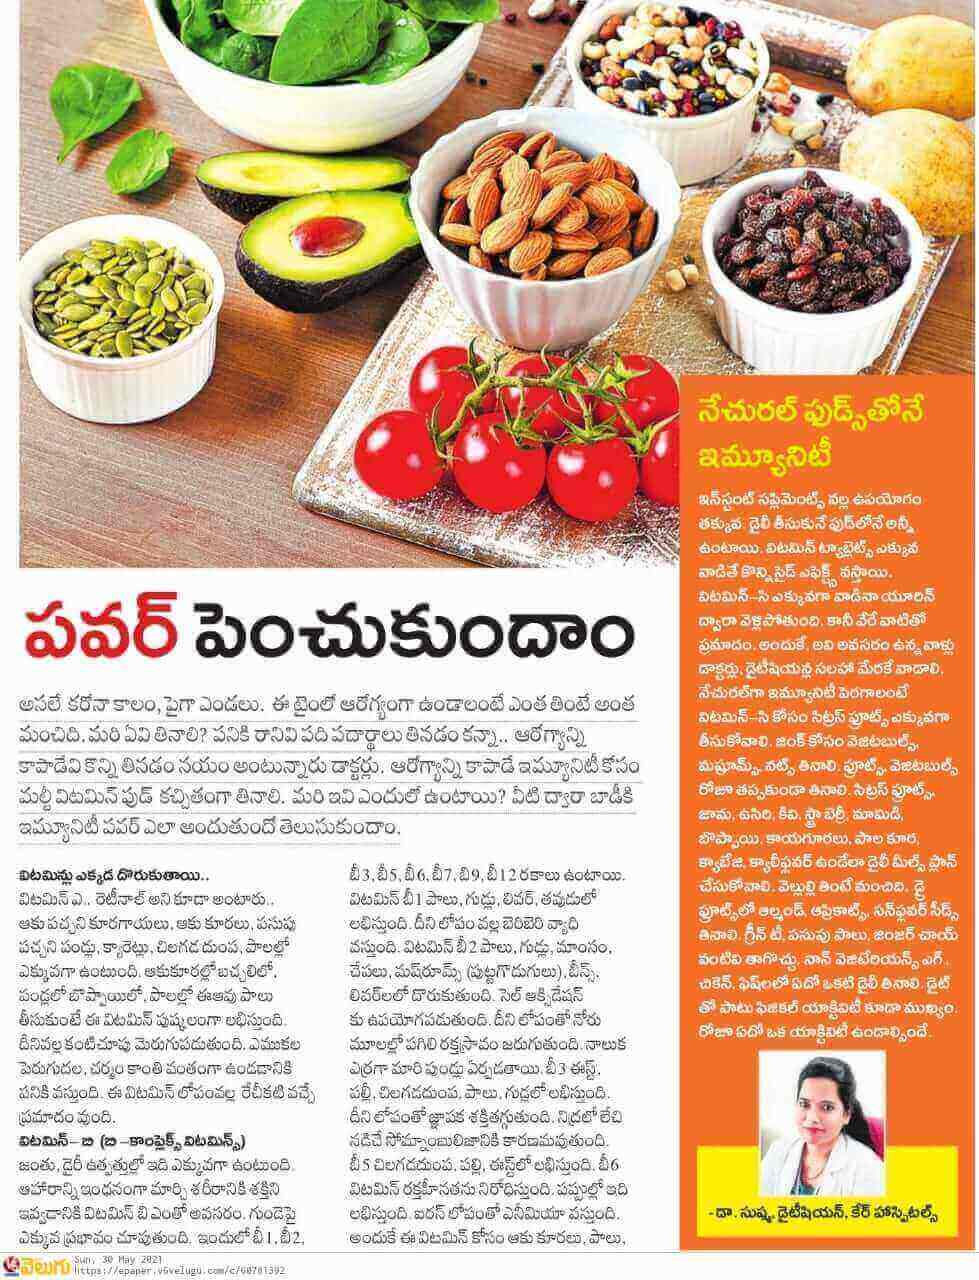 Article on Immunity Booster Food by Nutritionist Sushma